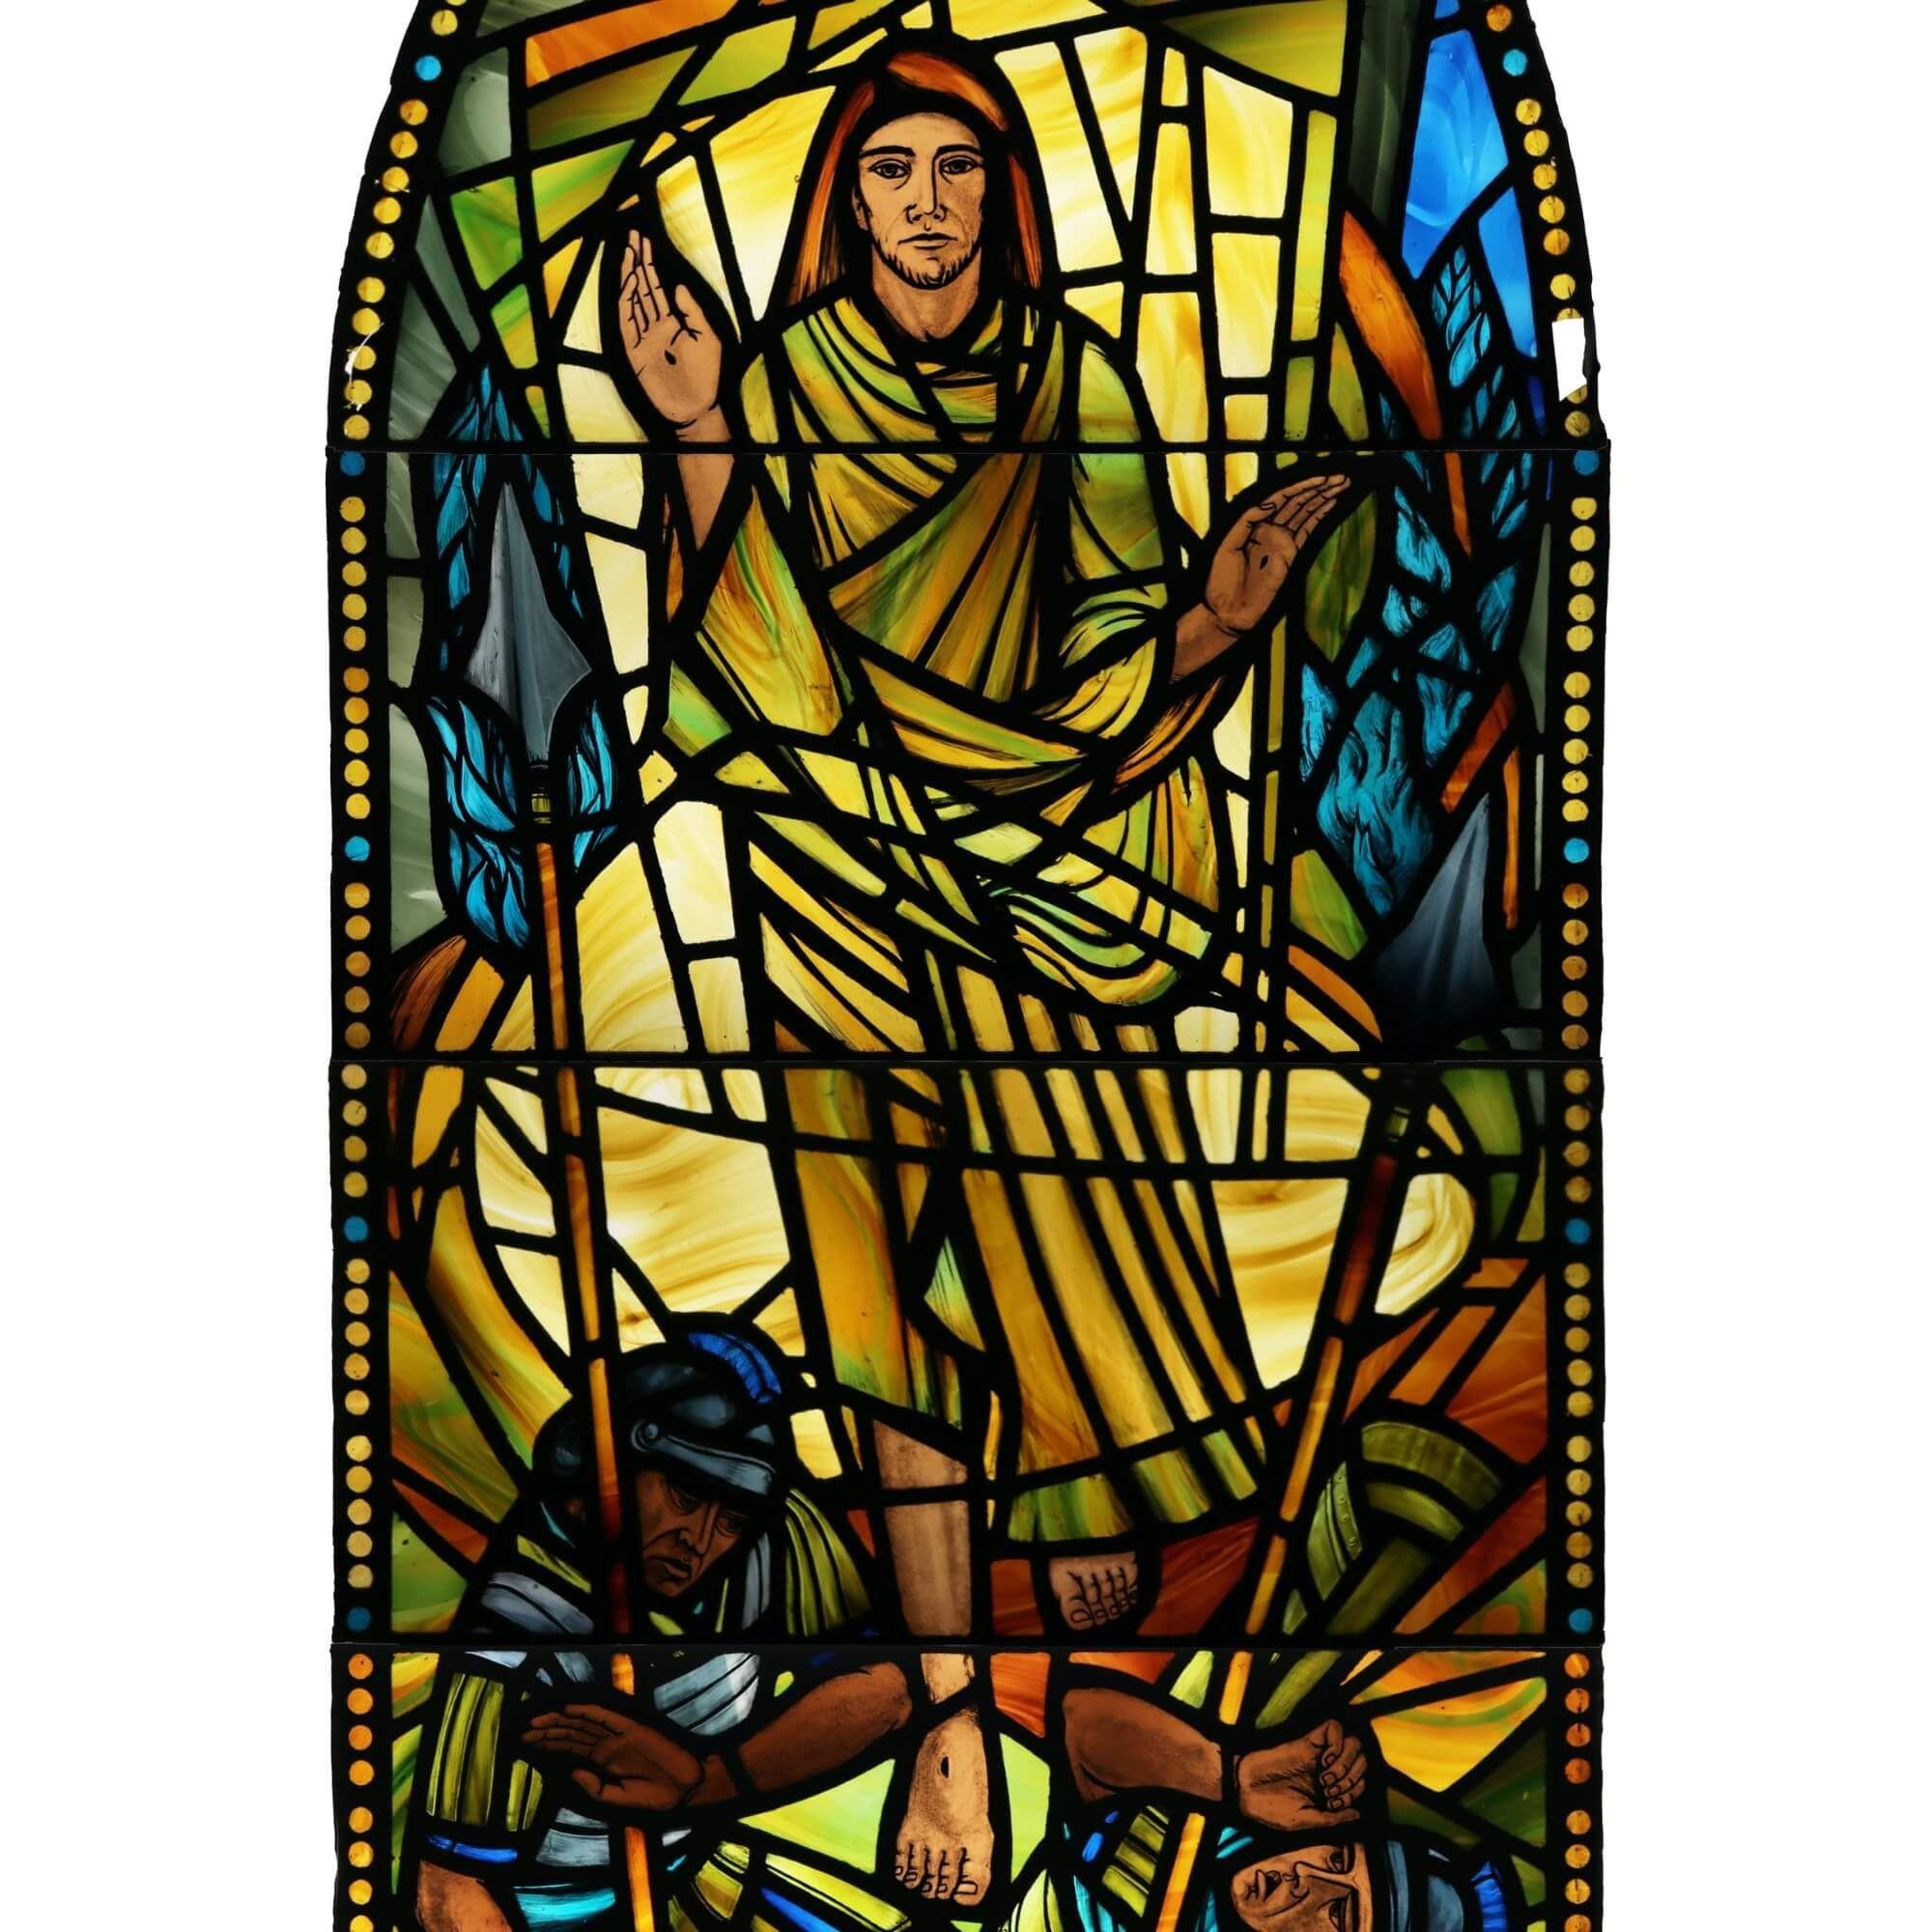 A vibrant religious leaded stained glass window depicting an ecclesiastical scene dating from the Mid-20th Century. This beautiful stained glass window is one of four we are offering for sale, originally installed at the former parish church in